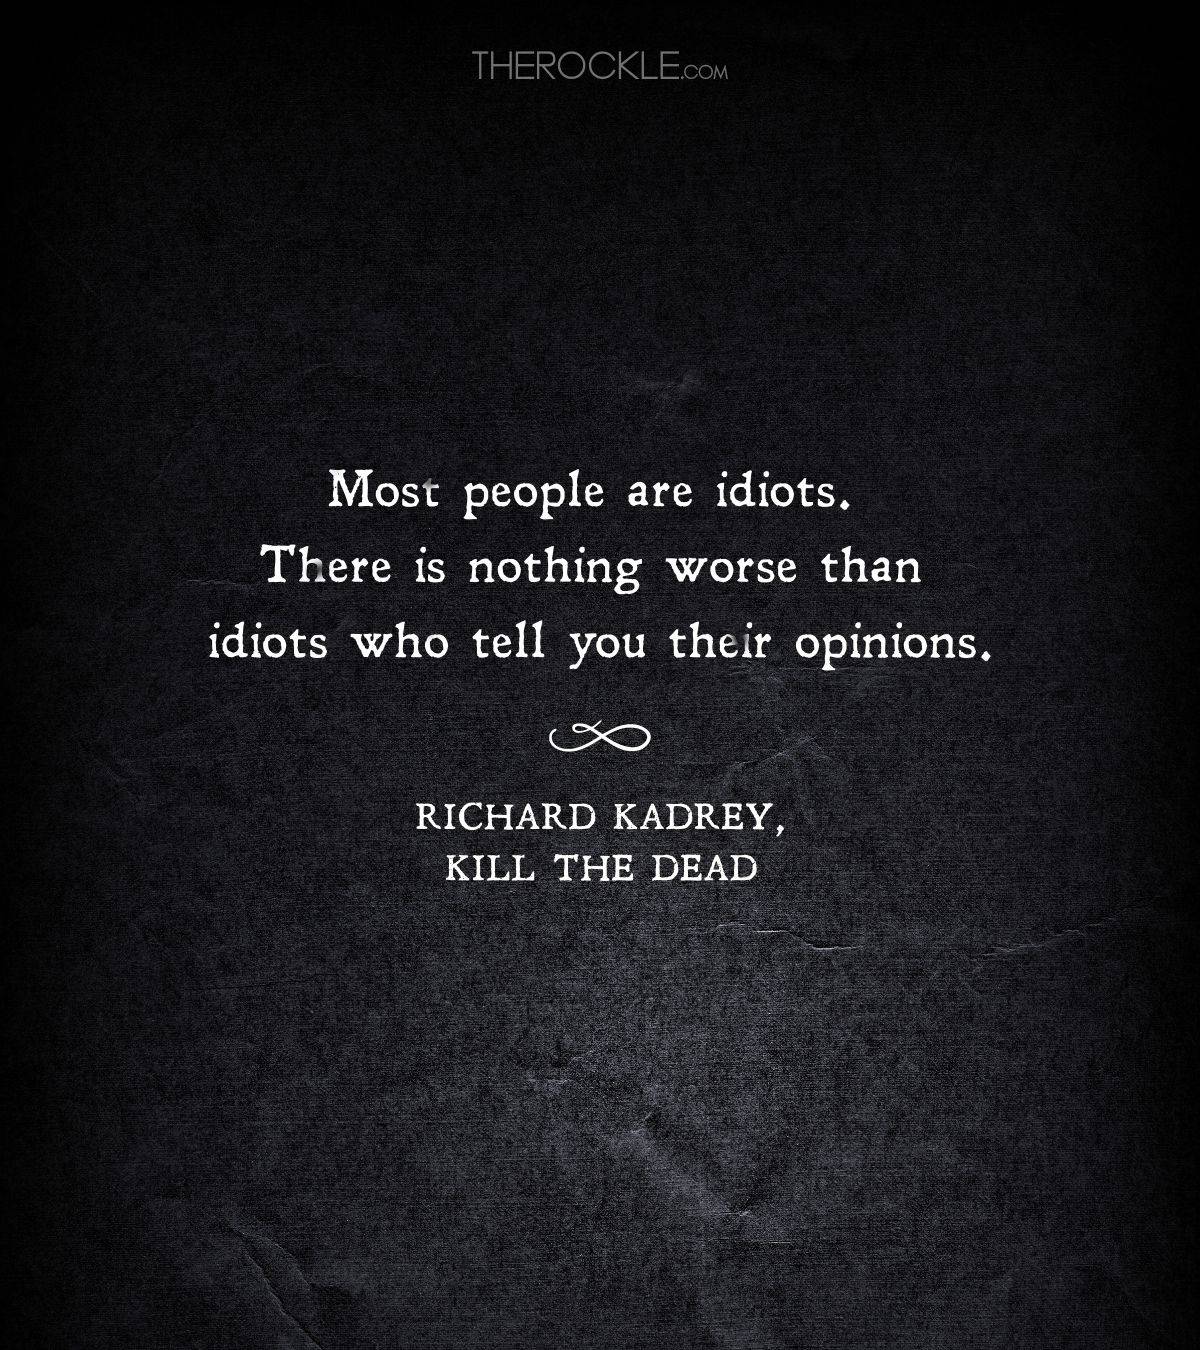 Quote from Richard Kadrey book